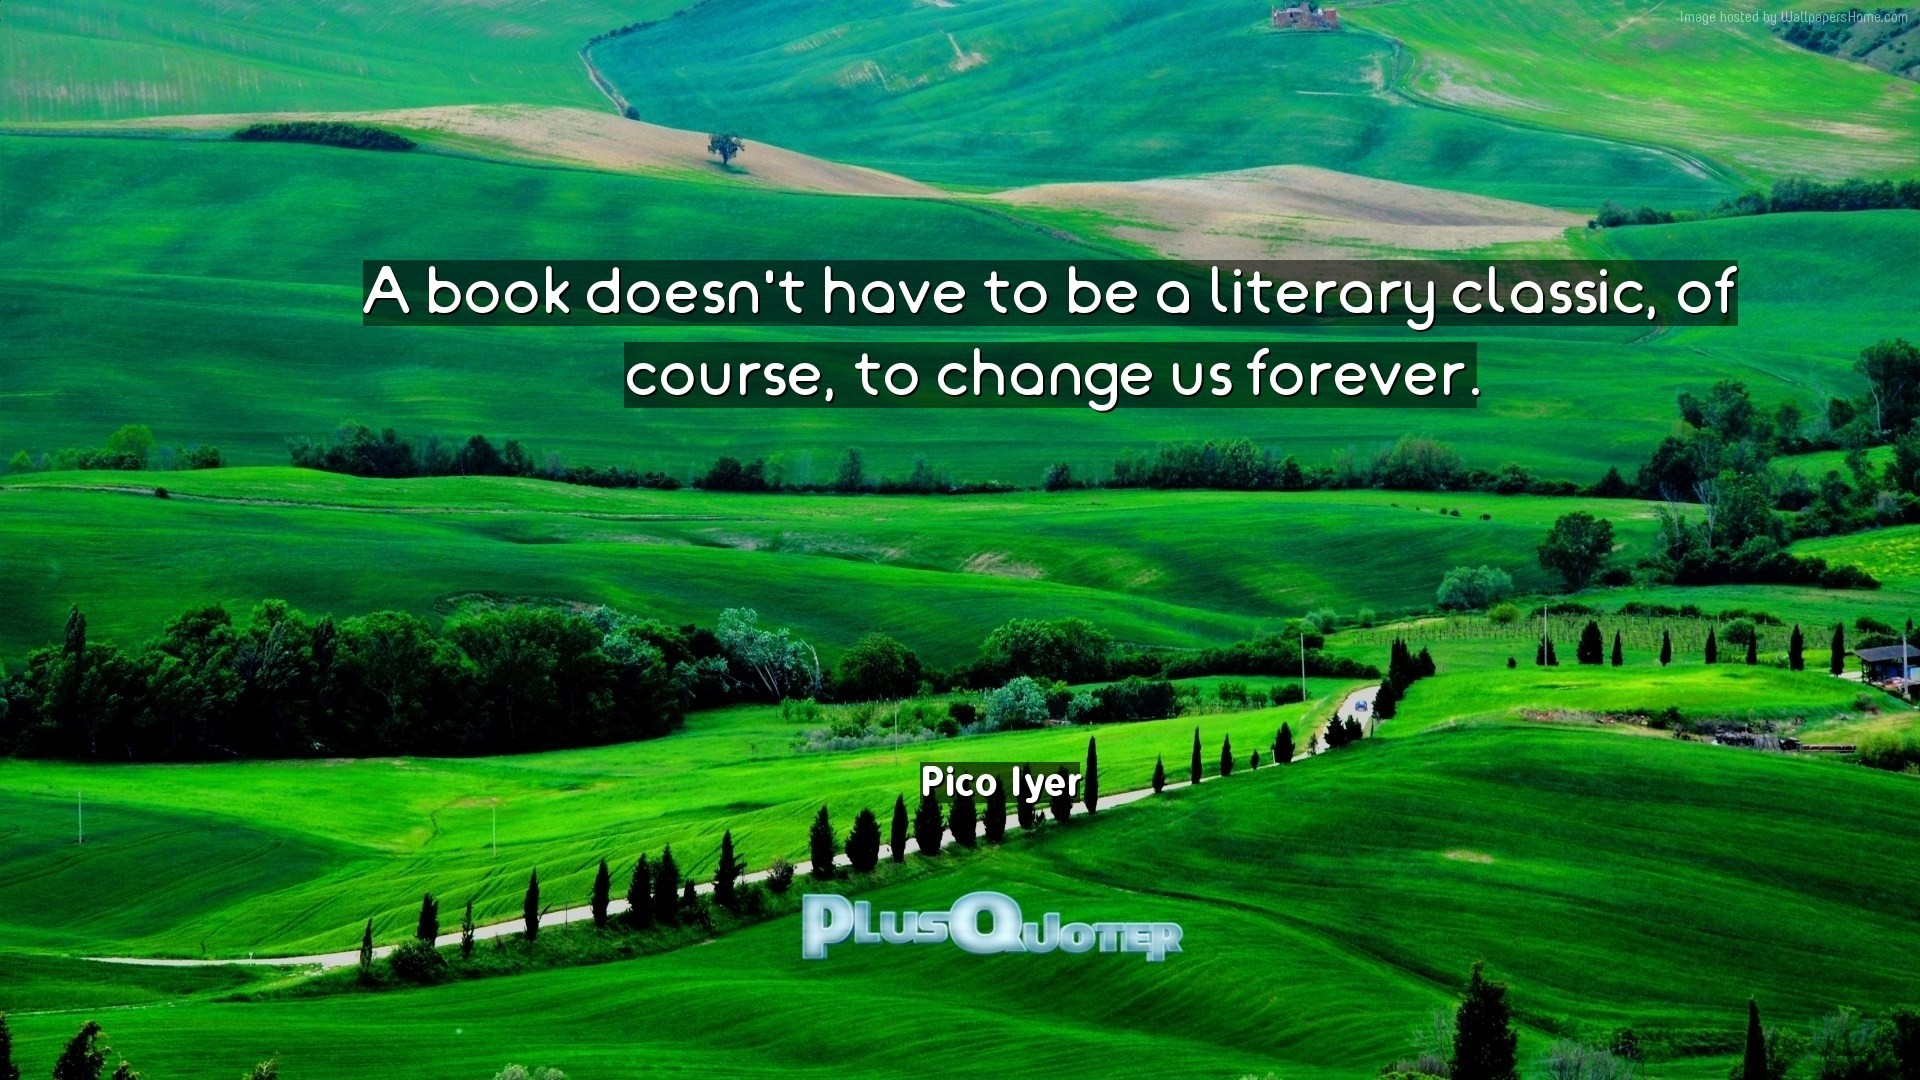 1920x1080 Download Wallpaper with inspirational Quotes- "A book doesn. “